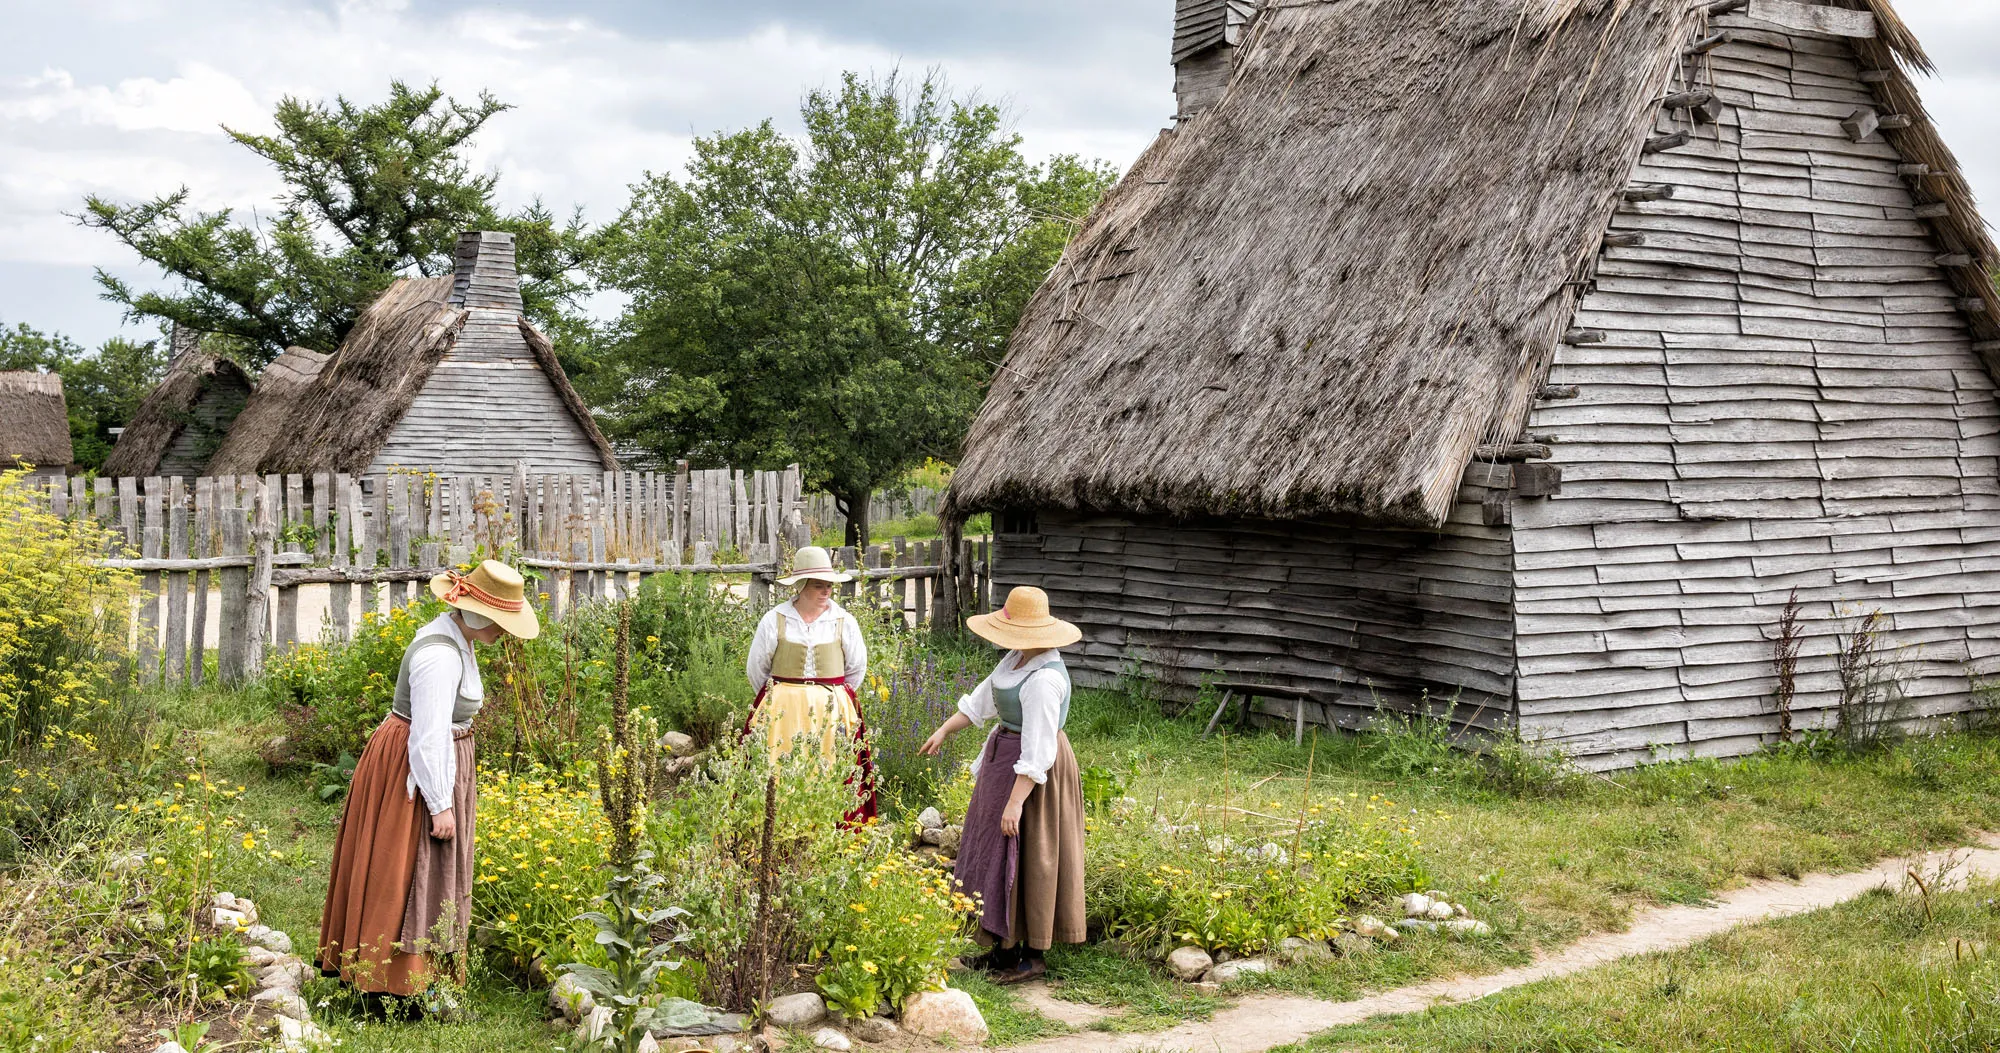 Featured image for “Plymouth, Lexington & Concord: A Day Trip from Boston”